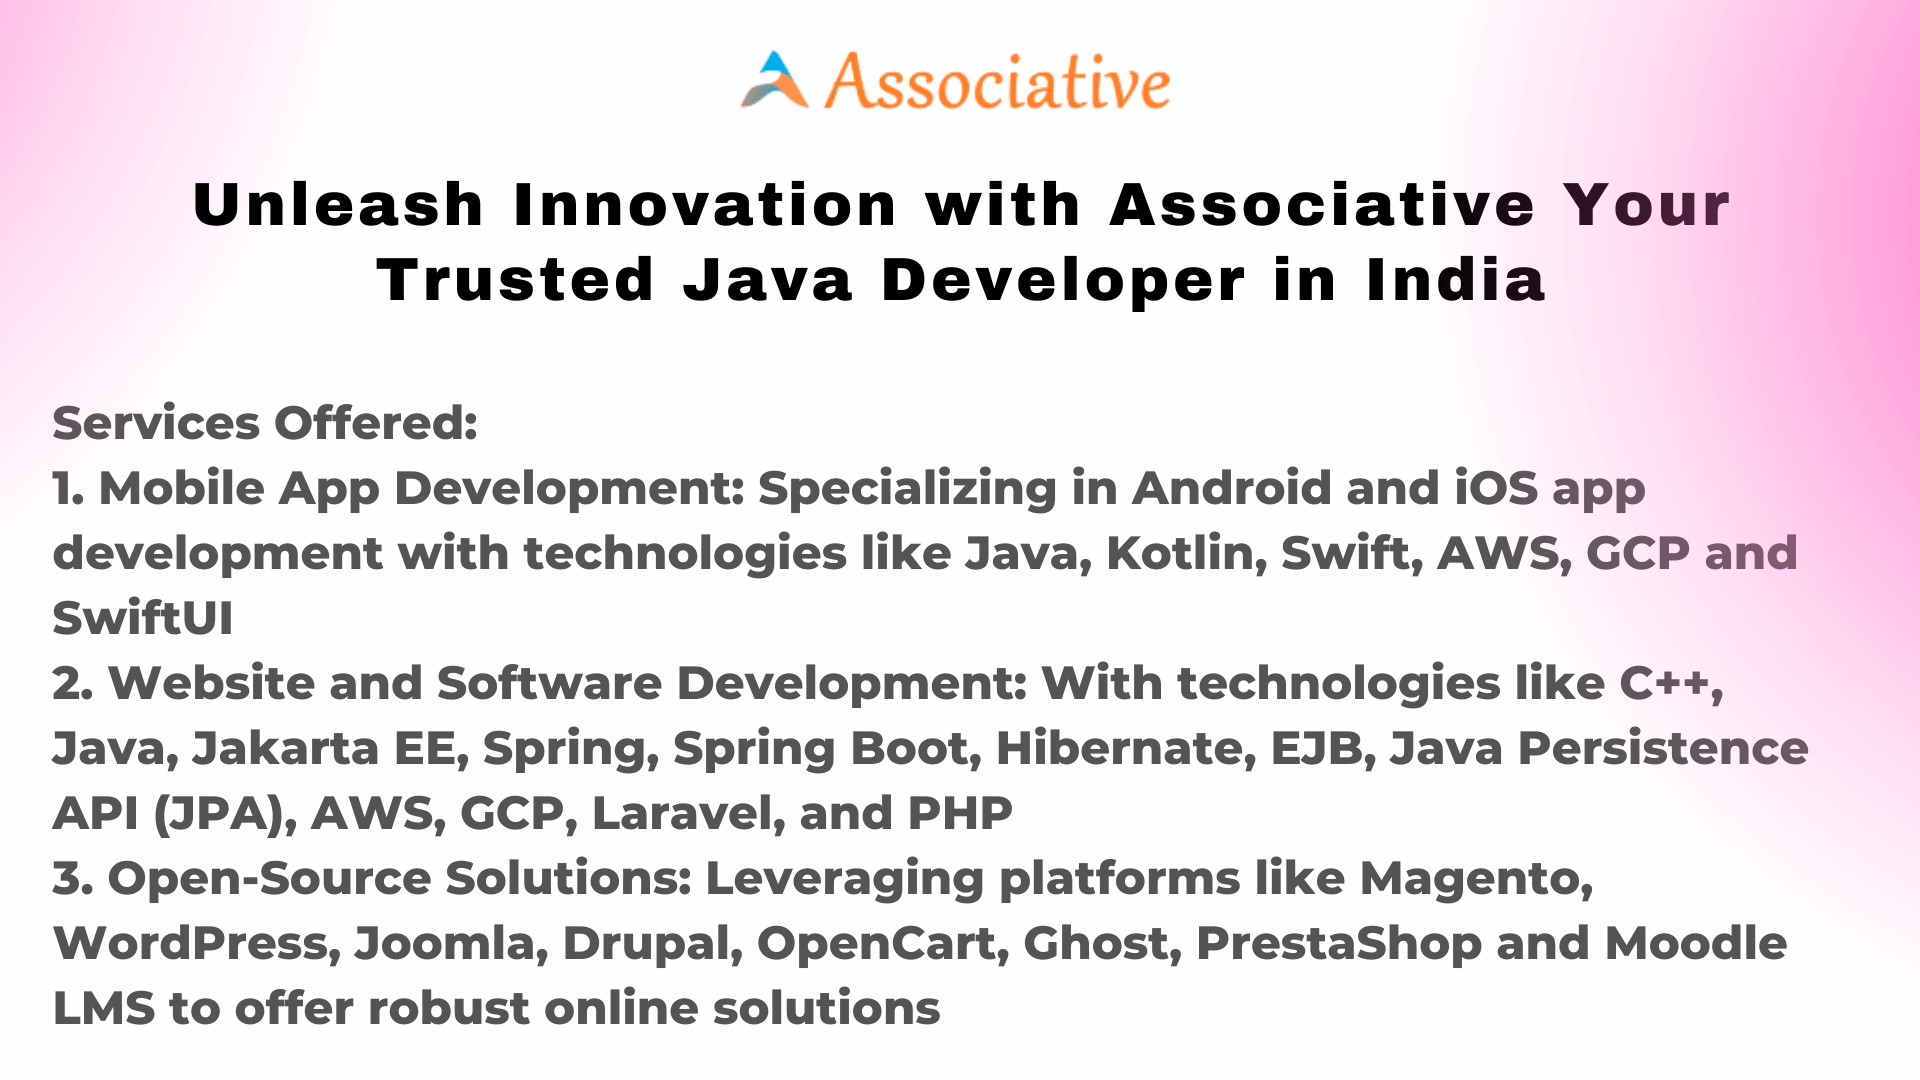 Unleash Innovation with Associative Your Trusted Java Developer in India